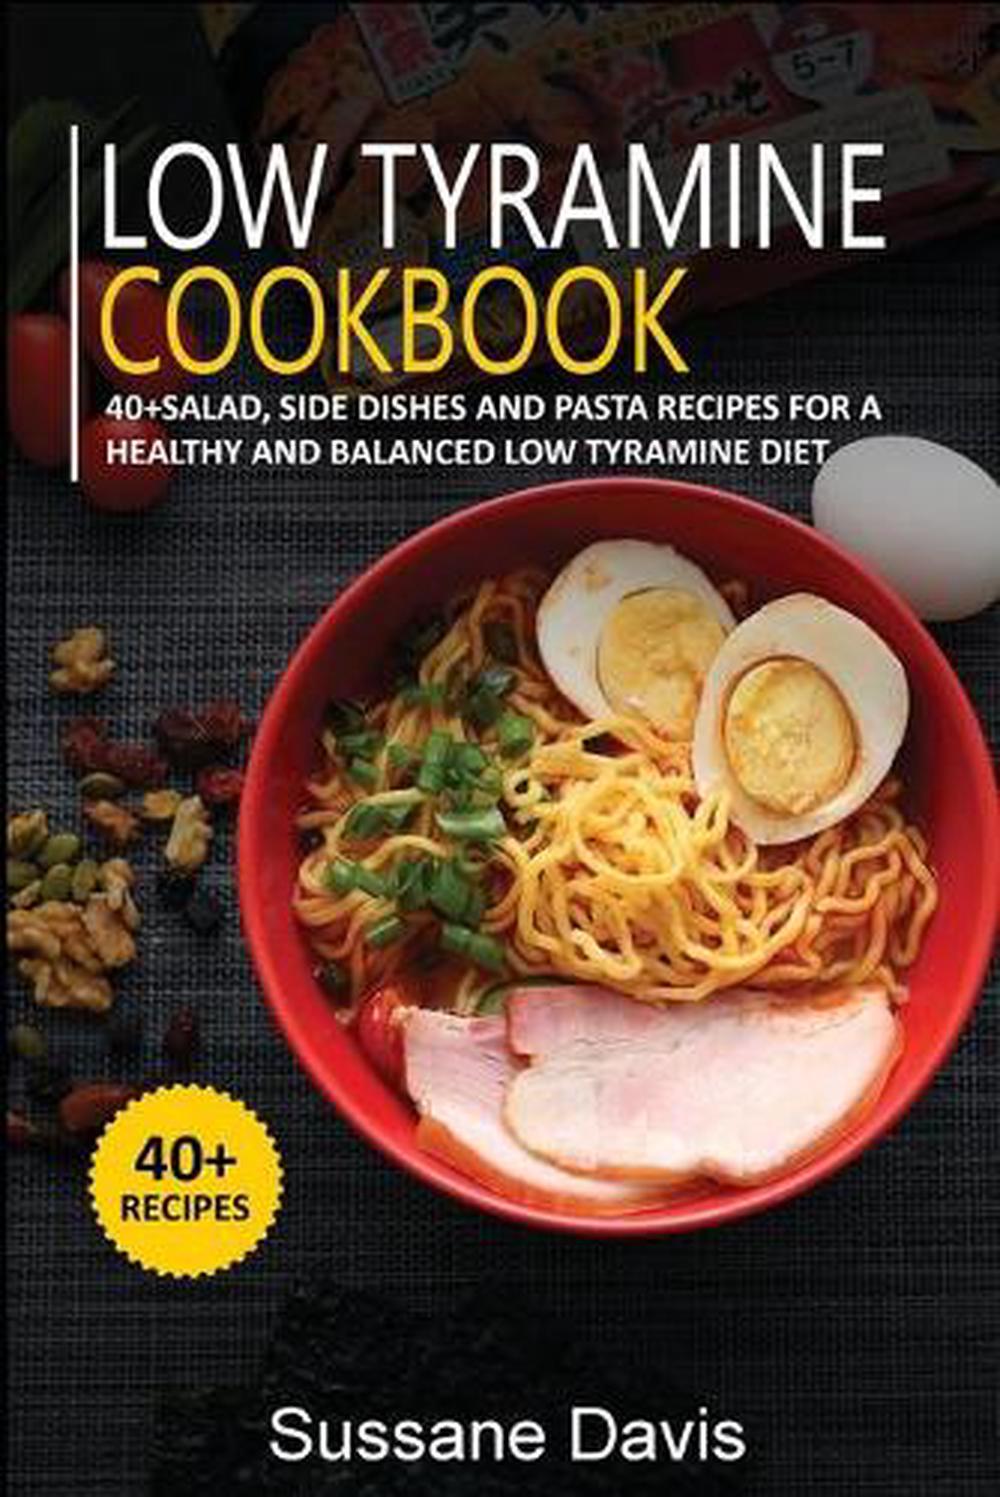 Low Tyramine Cookbook: 40+Salad, Side Dishes and Pasta ...